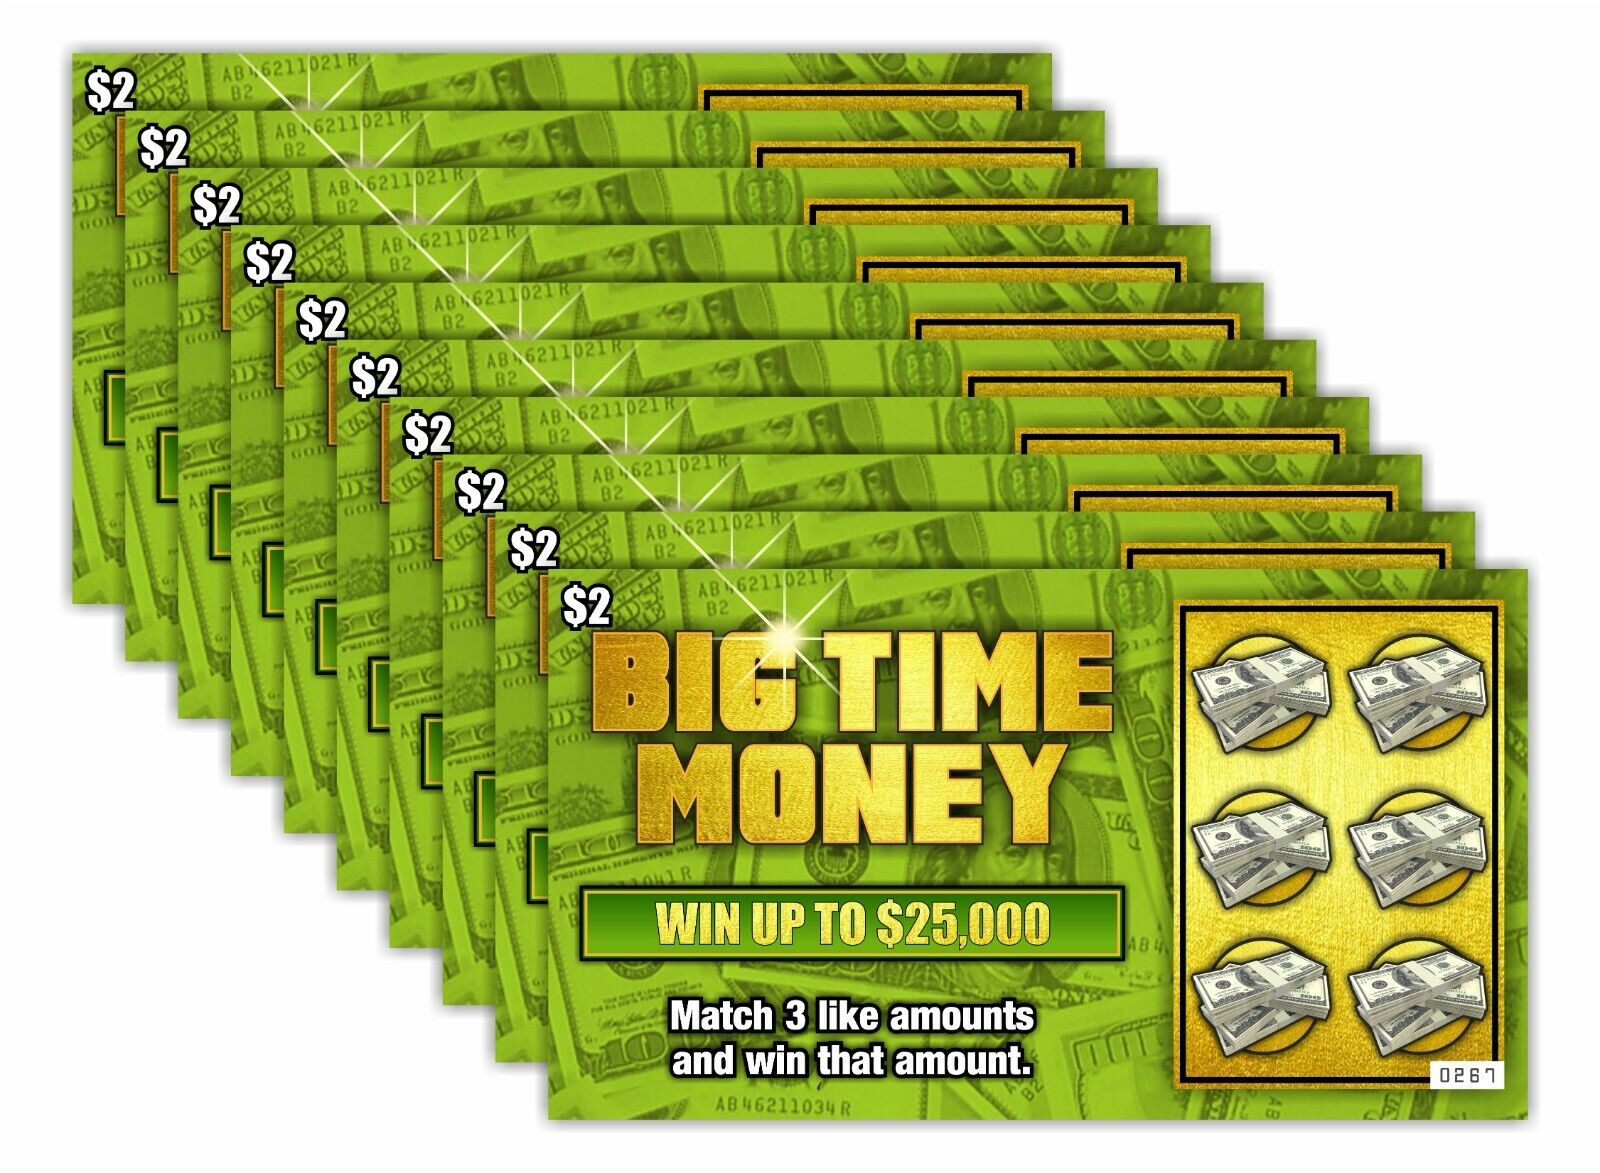 Prank Gag Fake Lottery Tickets Big Time Money 10 Tickets, Each Wins $25,000